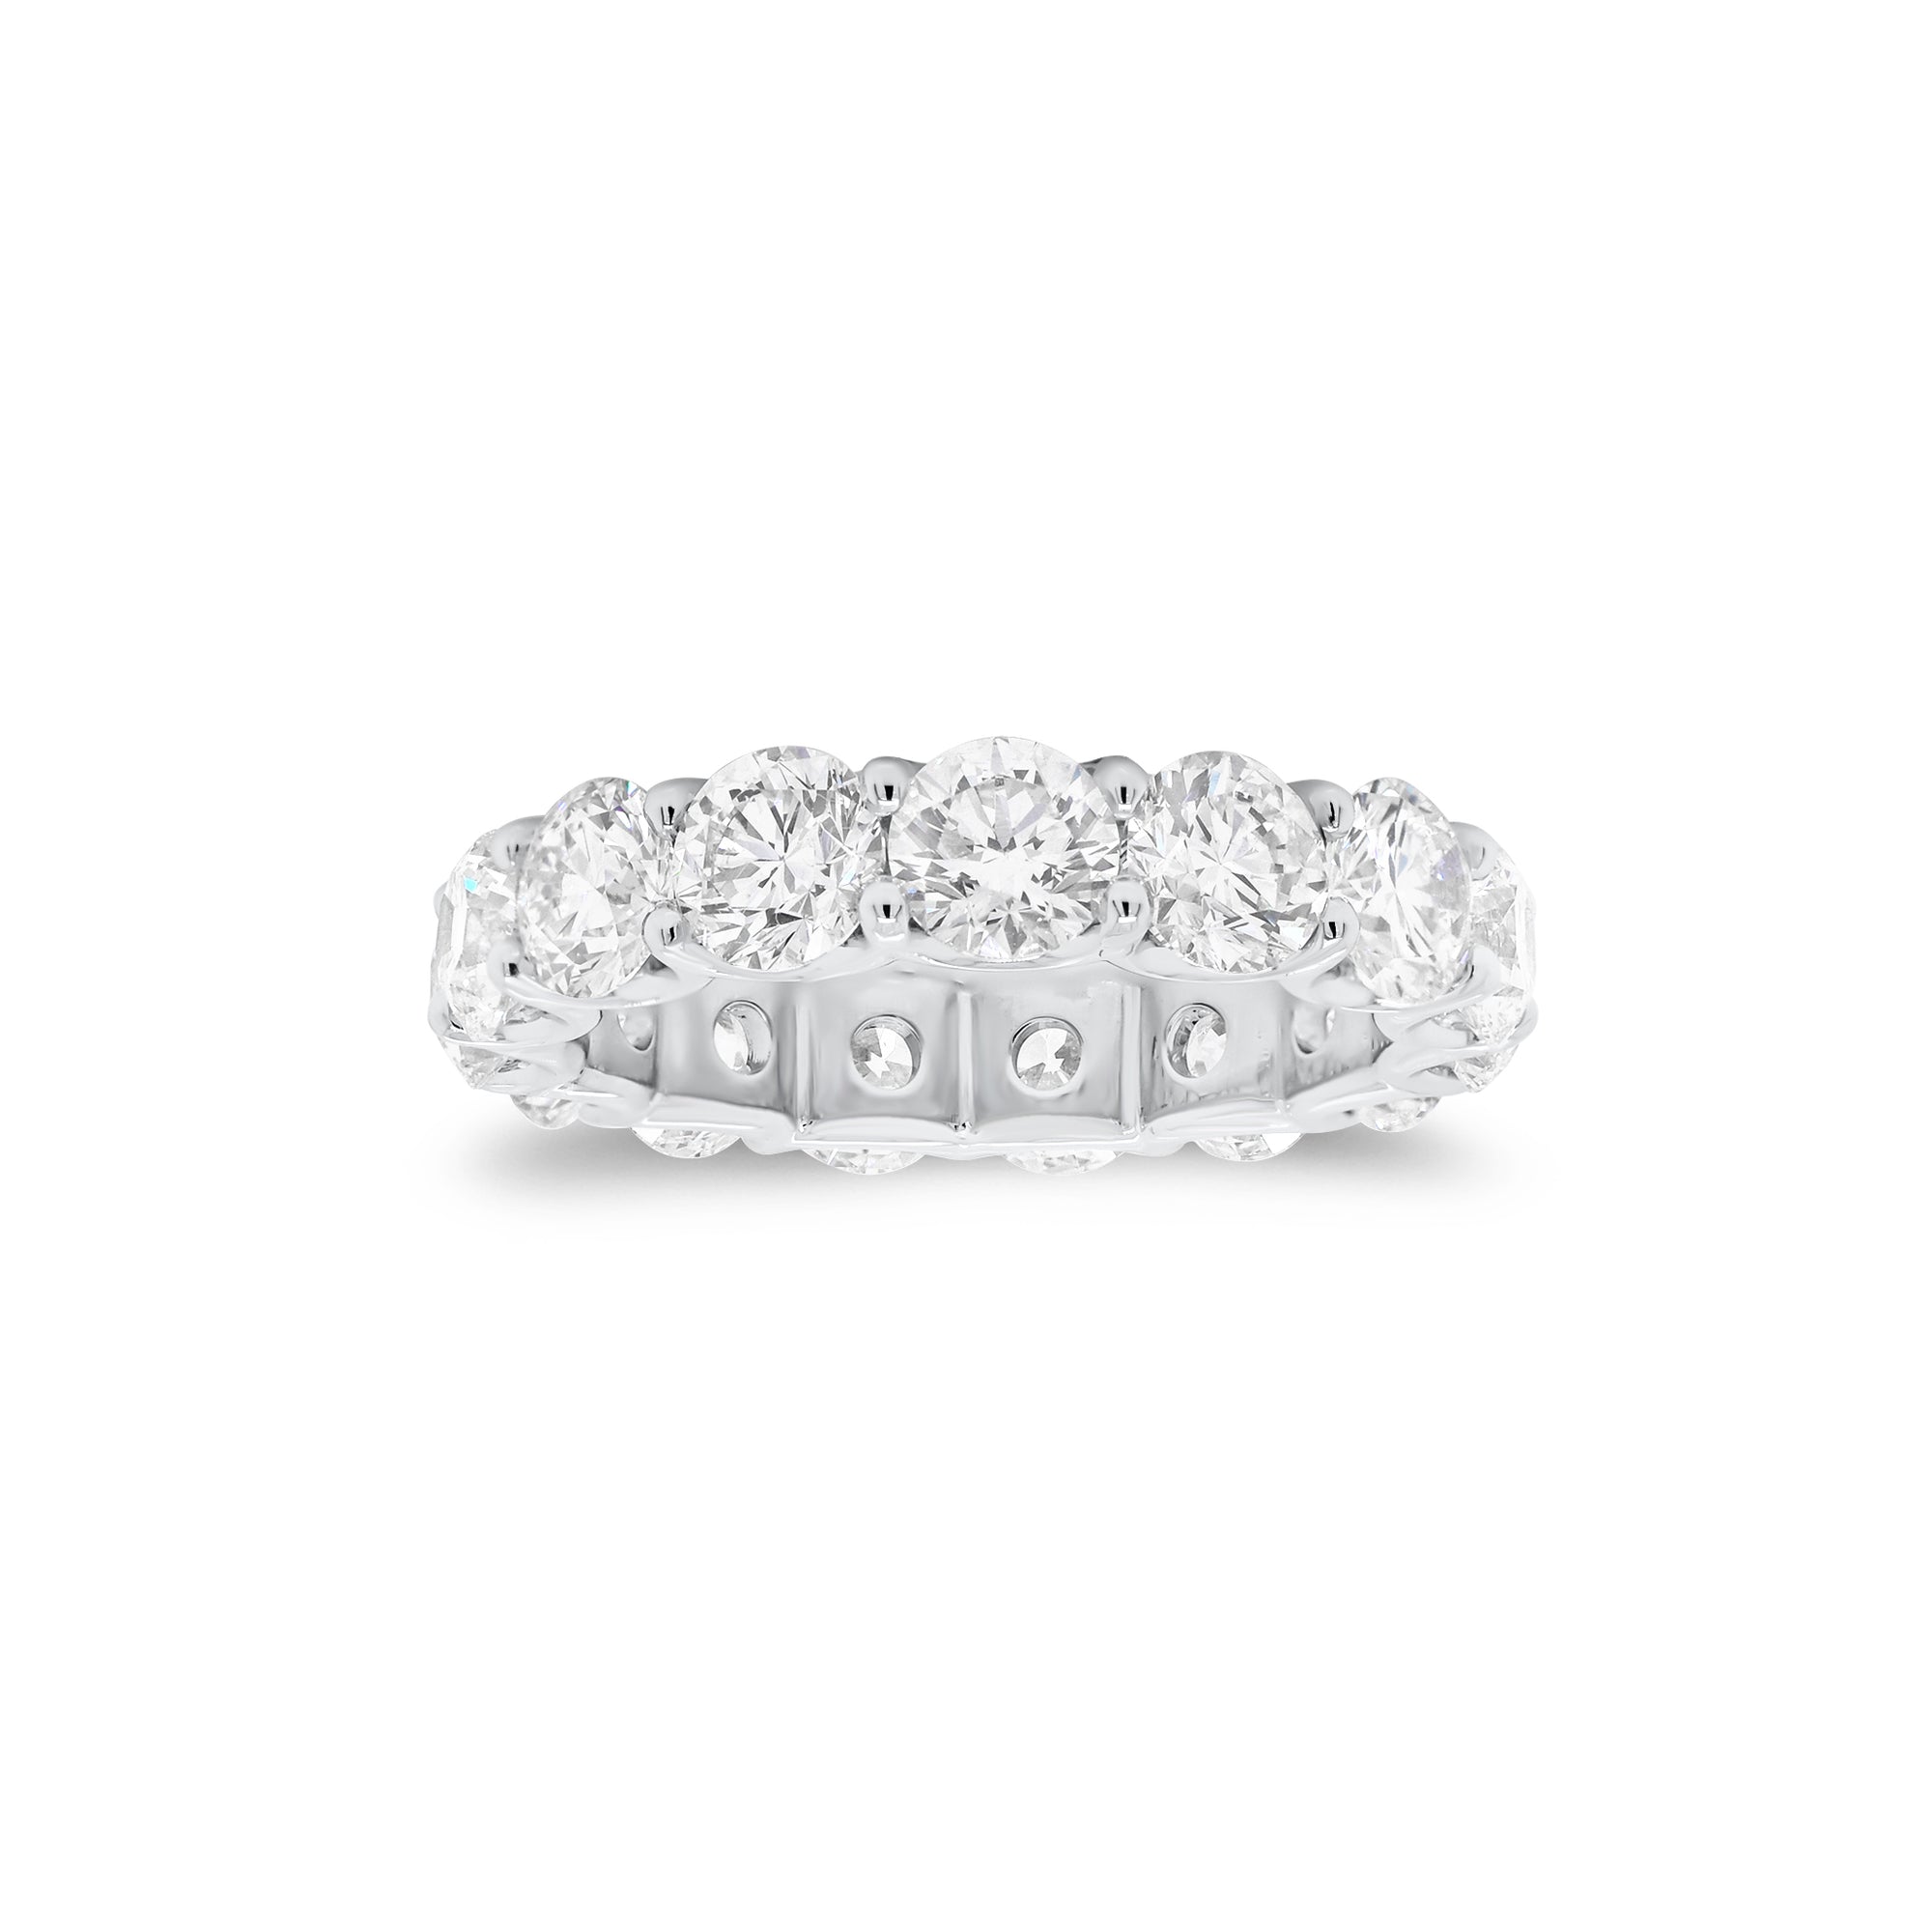 3.76 ct Diamond Eternity Ring - 18K gold weighing 3.60 grams  - 16 round diamonds weighing 3.76 carats (GIA-graded G-H color, SI1 clarity)